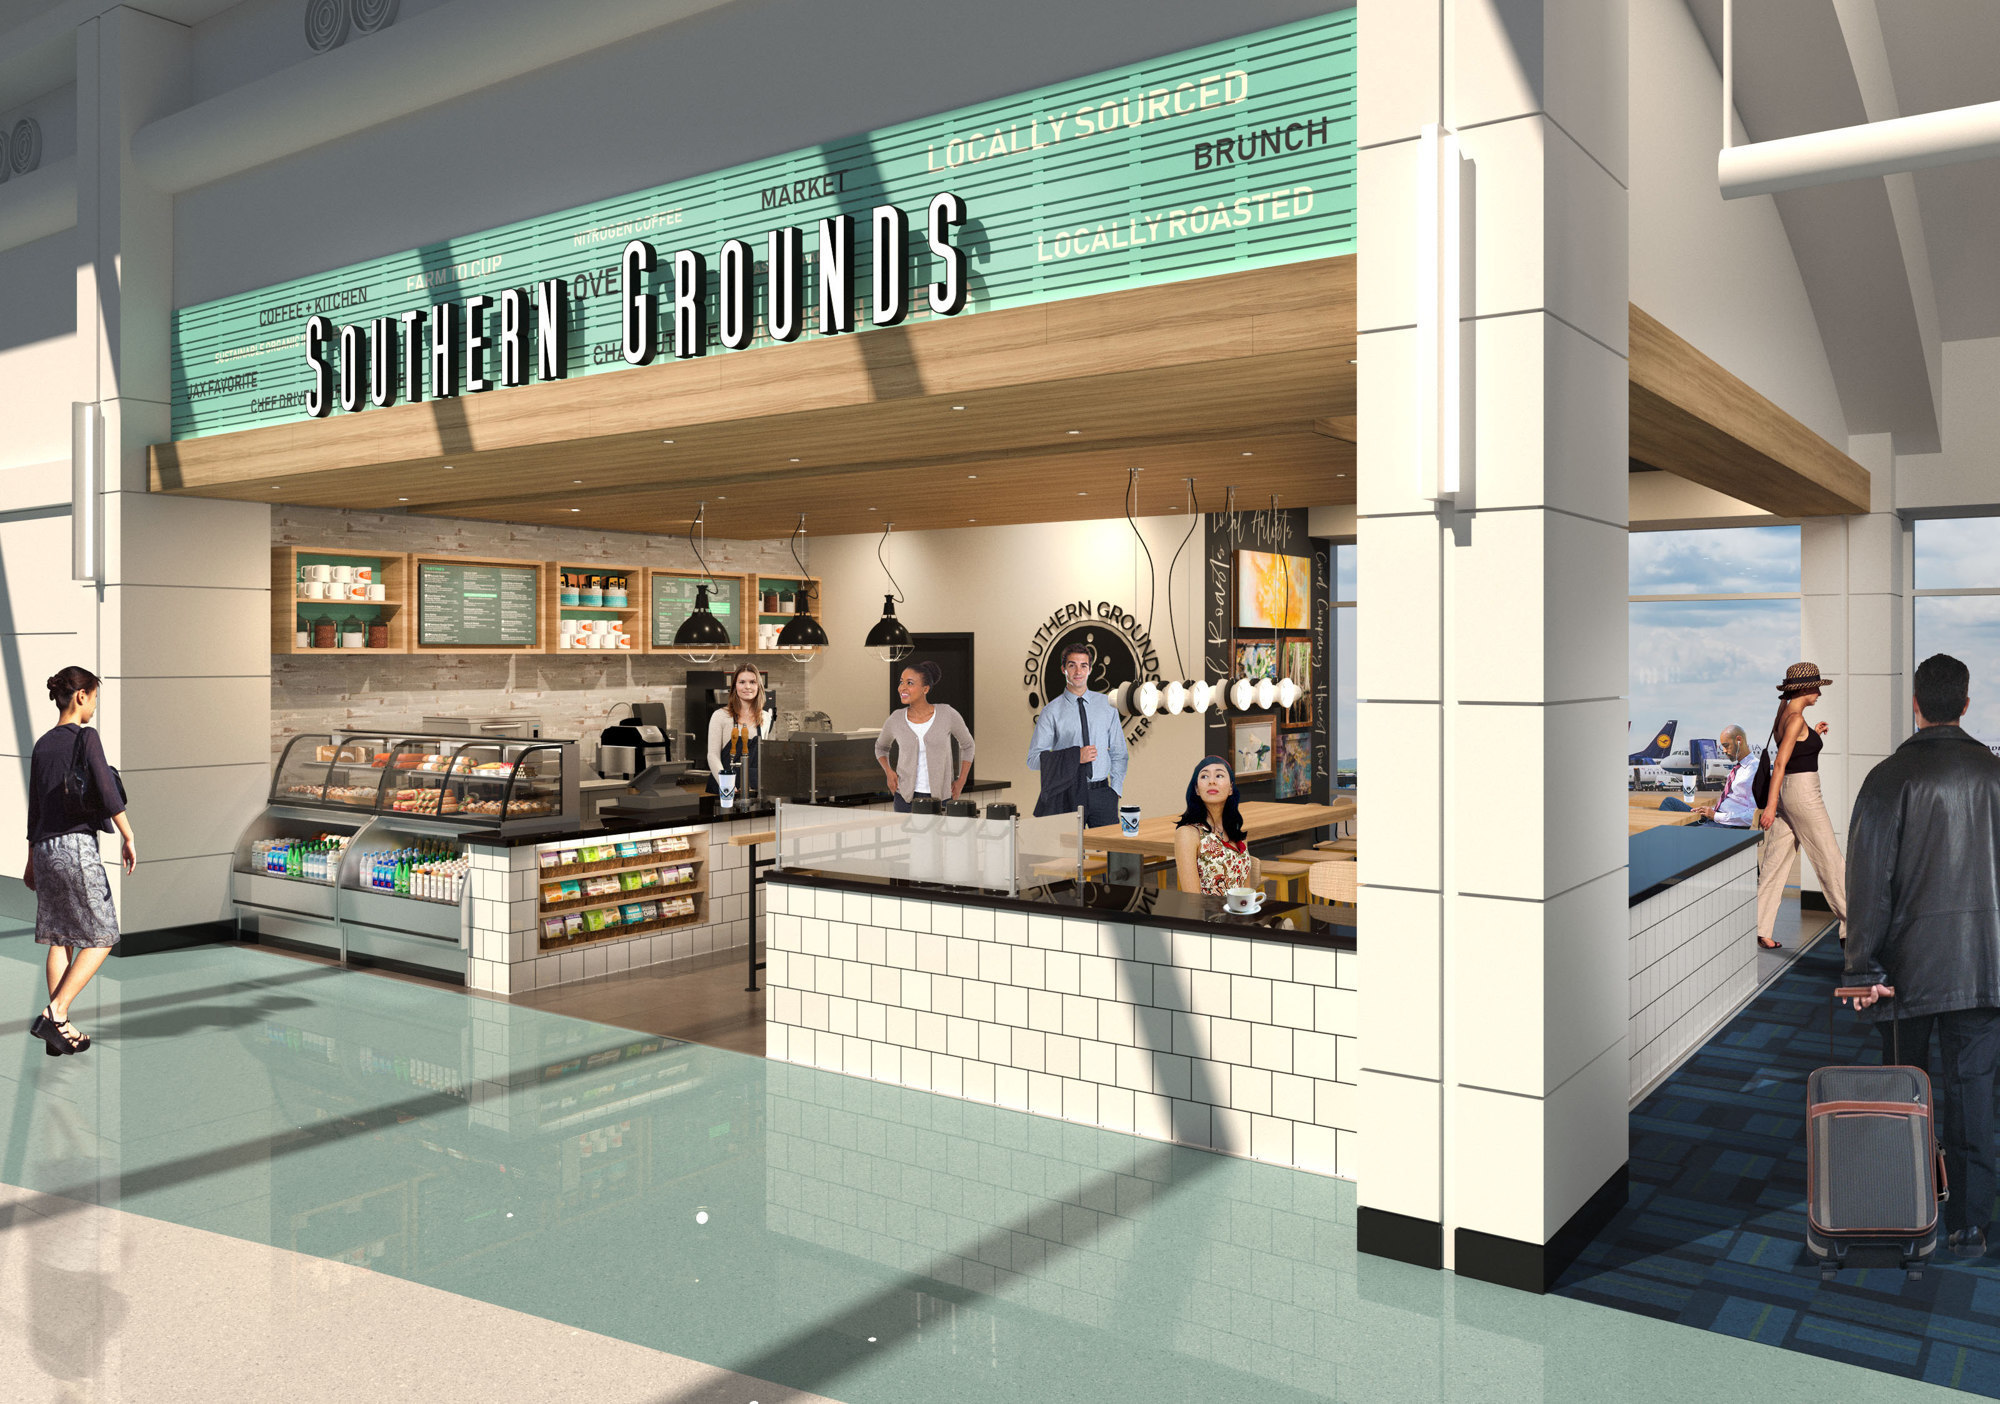 Southern Grounds plans to open in Concourse A at Jacksonville International Airport before Thanksgiving.